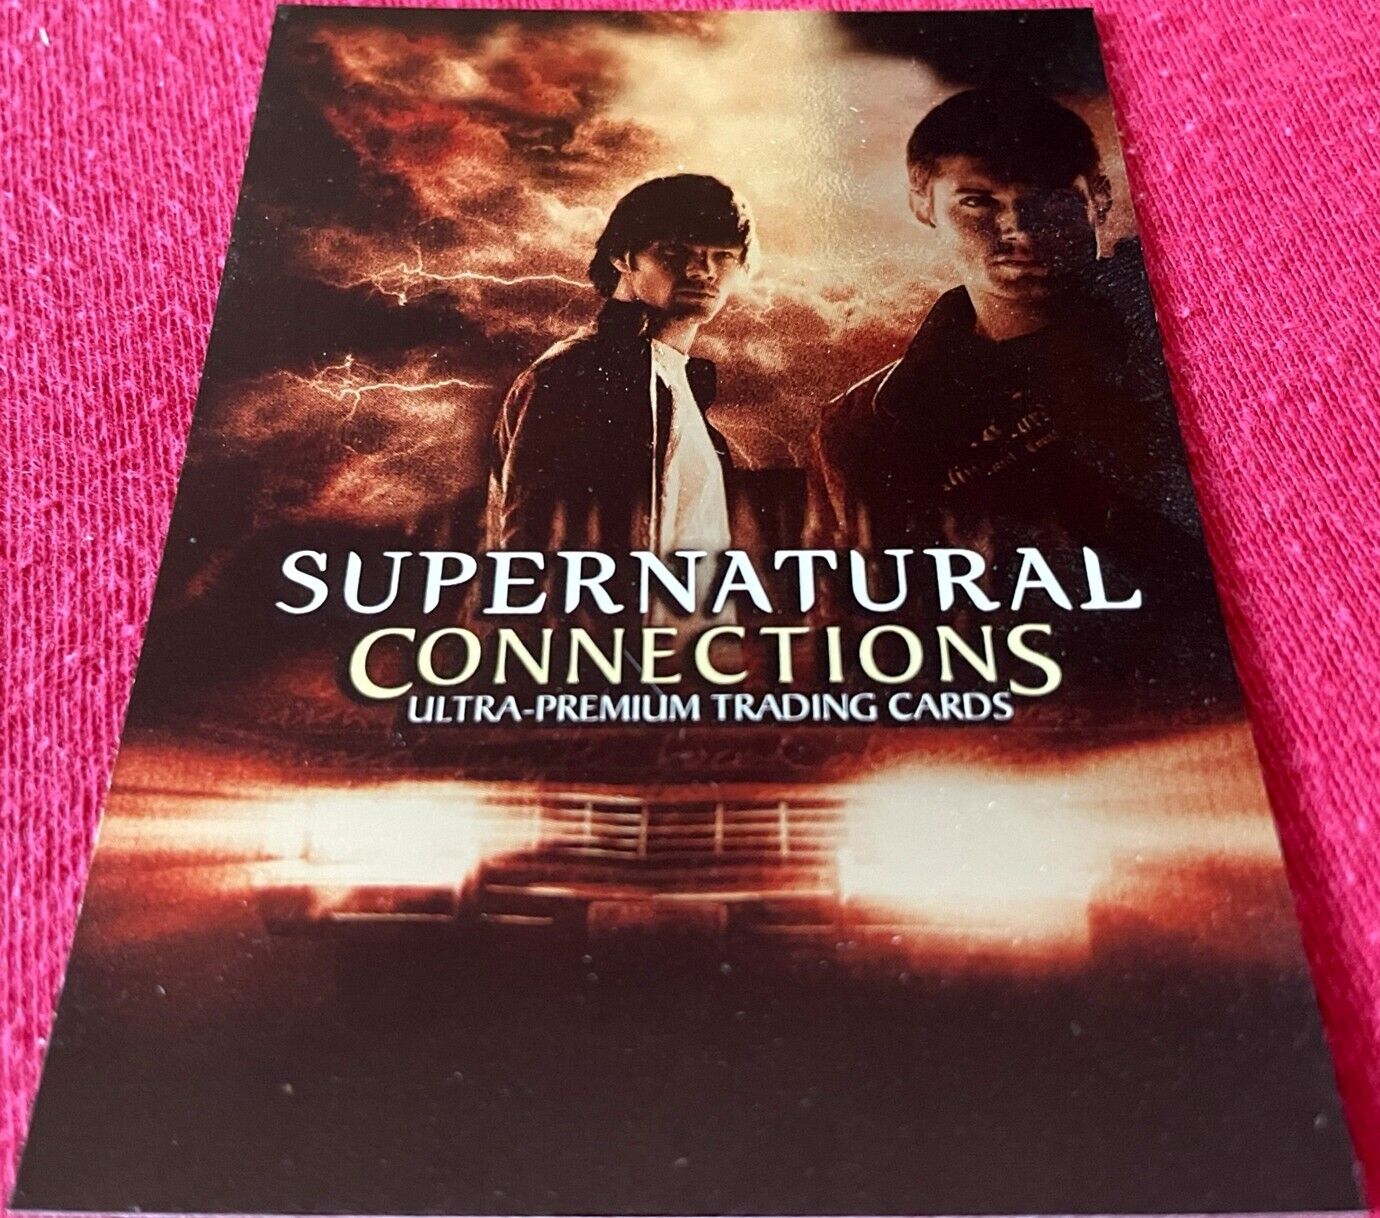 Supernatural Connections 2008 San Diego Comic-Con SDCC Inkworks promo card P-1